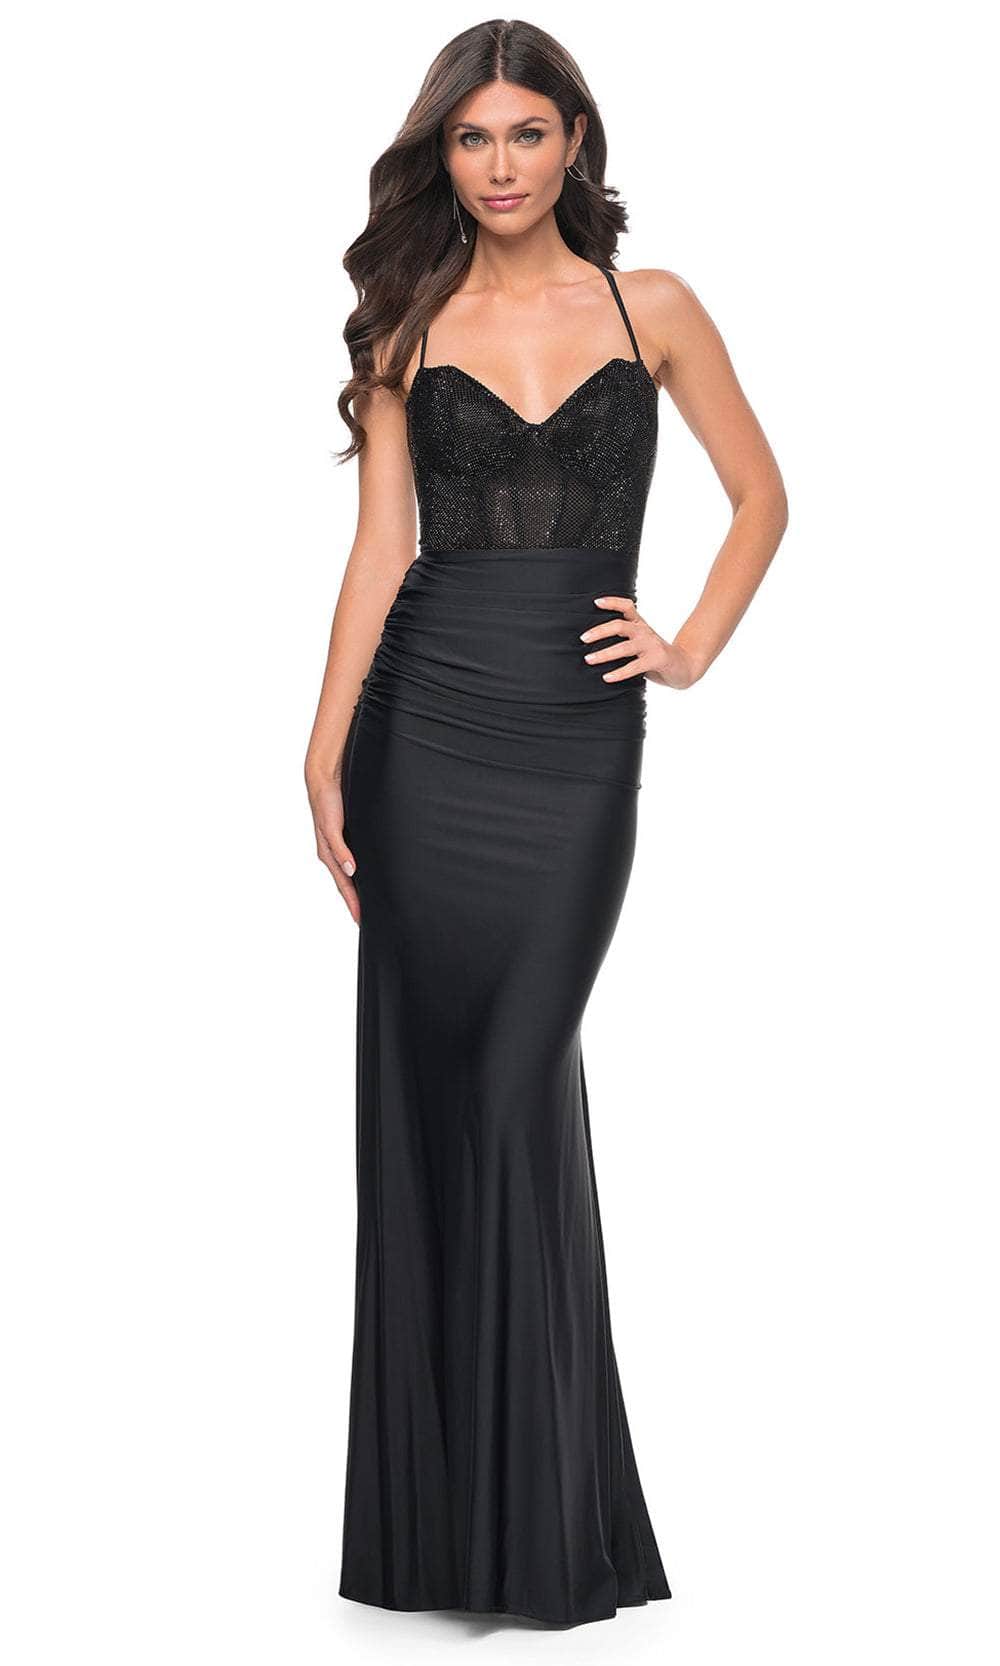 La Femme 32260 - Lace-Up Back Ruched Prom Gown Formal Gowns 00 / Black